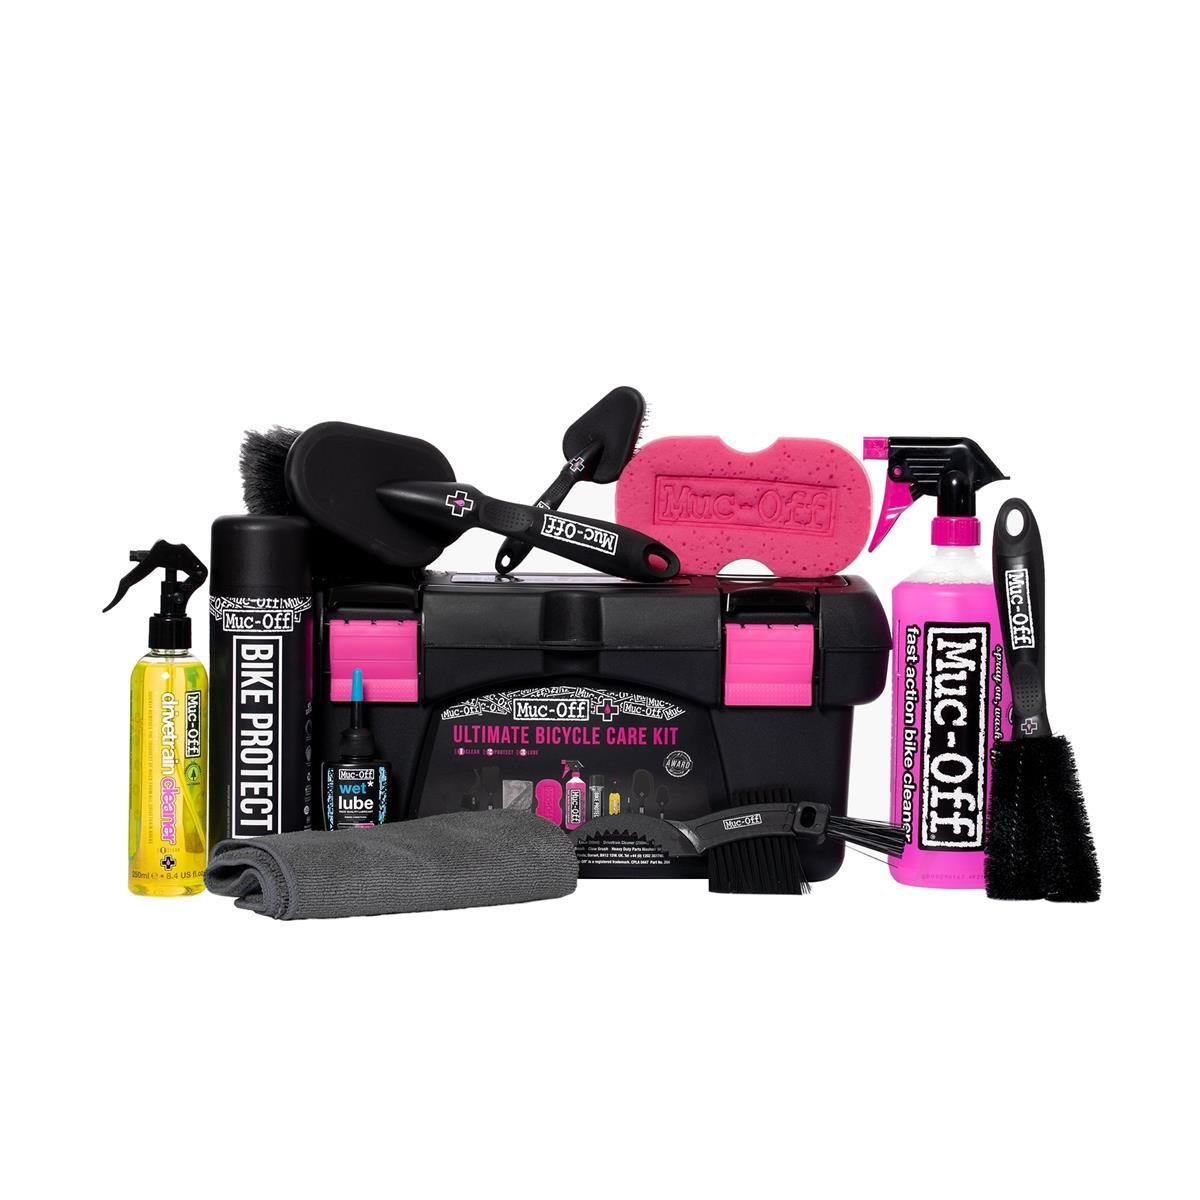 Muc-Off Nettoyant Velo Ultimate Bicycle Clean Set complet 10 en 1